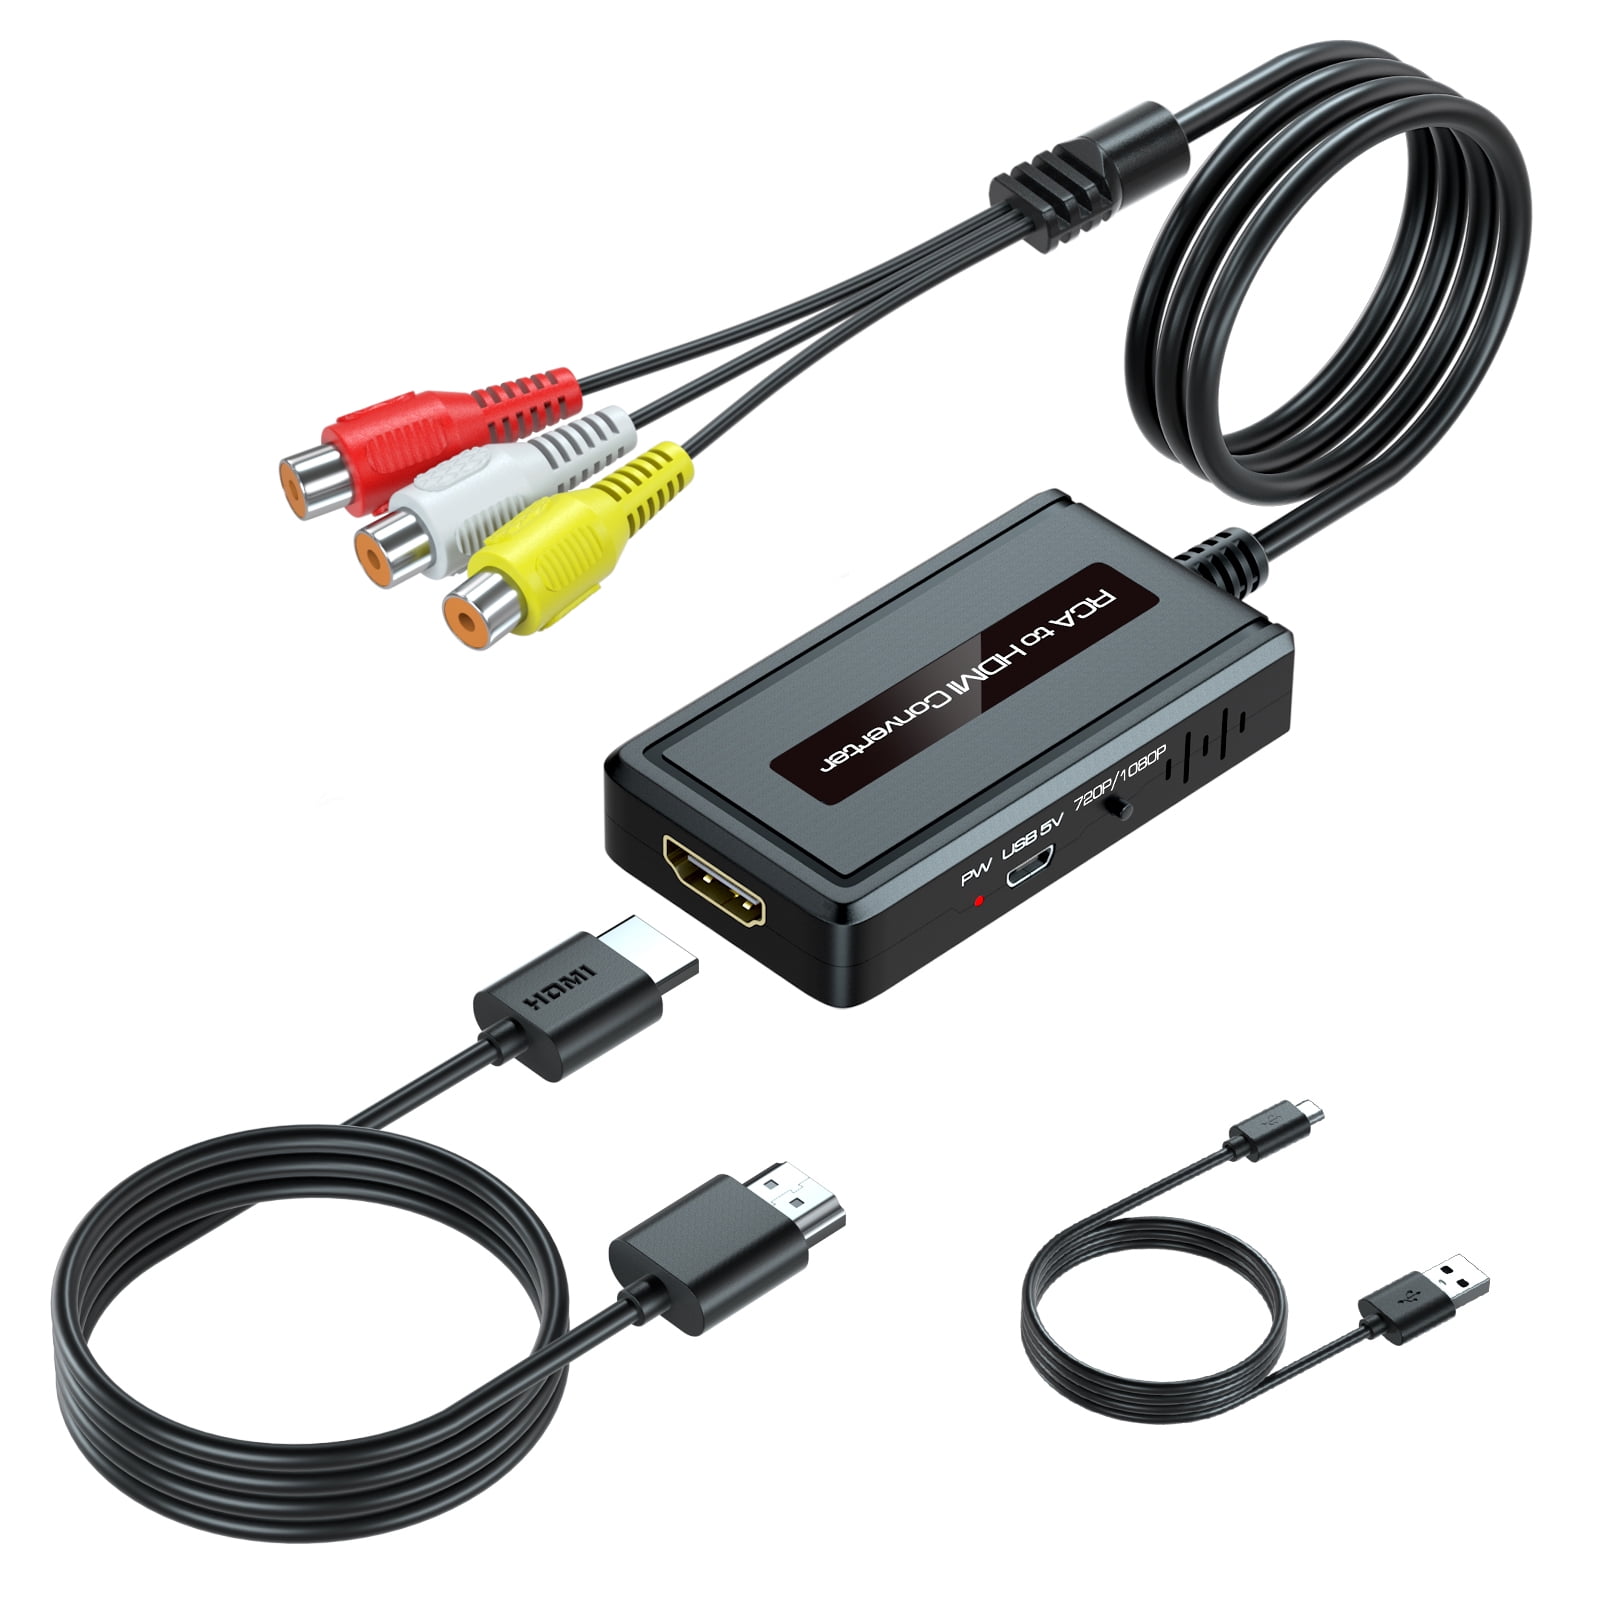 Forstad skat suffix Female RCA to HDMI Converter with HDMI Cable+RCA Cable for N64/PS2/Wii with Male  RCA Output, Composite CVBS AV to HDMI Adapter with 720P/1080P HDMI Output  Switch - Walmart.com